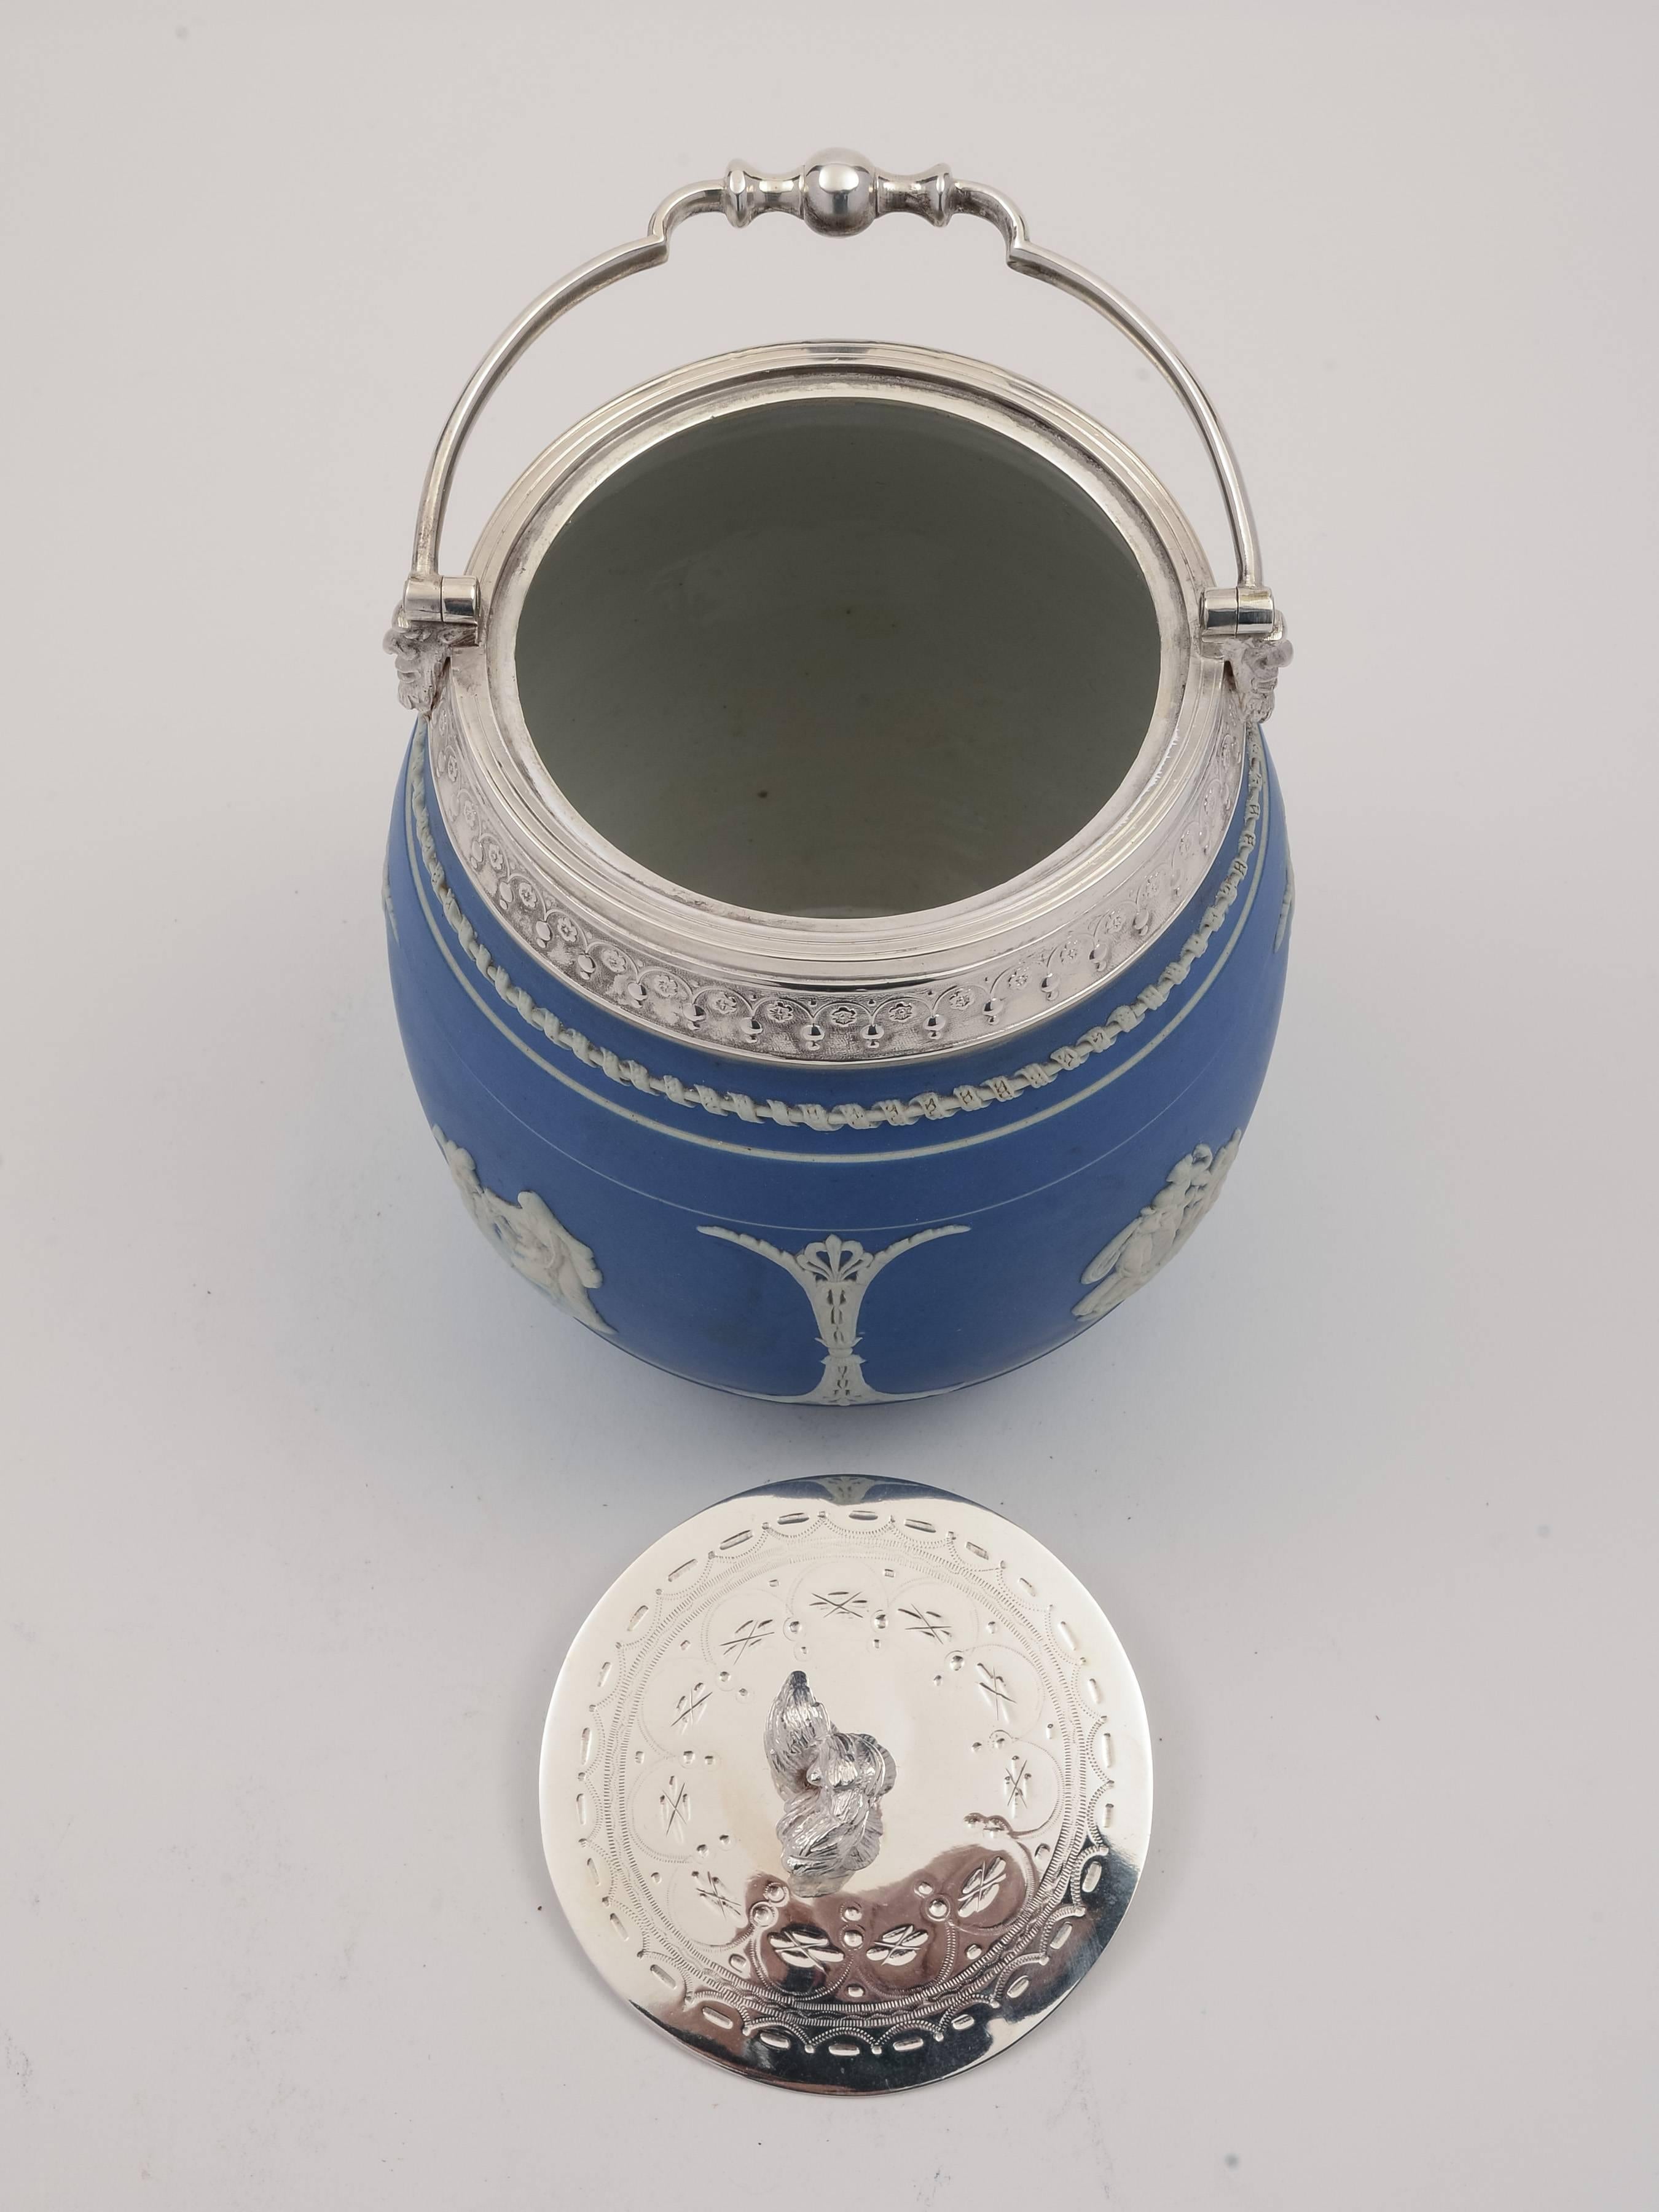 A lovely English Victorian blue jasperware china biscuit barrel with folding loop handle and embossed silver plated lid. The china body has four classical scenes in relief and is unmarked but possibly made by Wedgwood, circa 1890.

Would make a